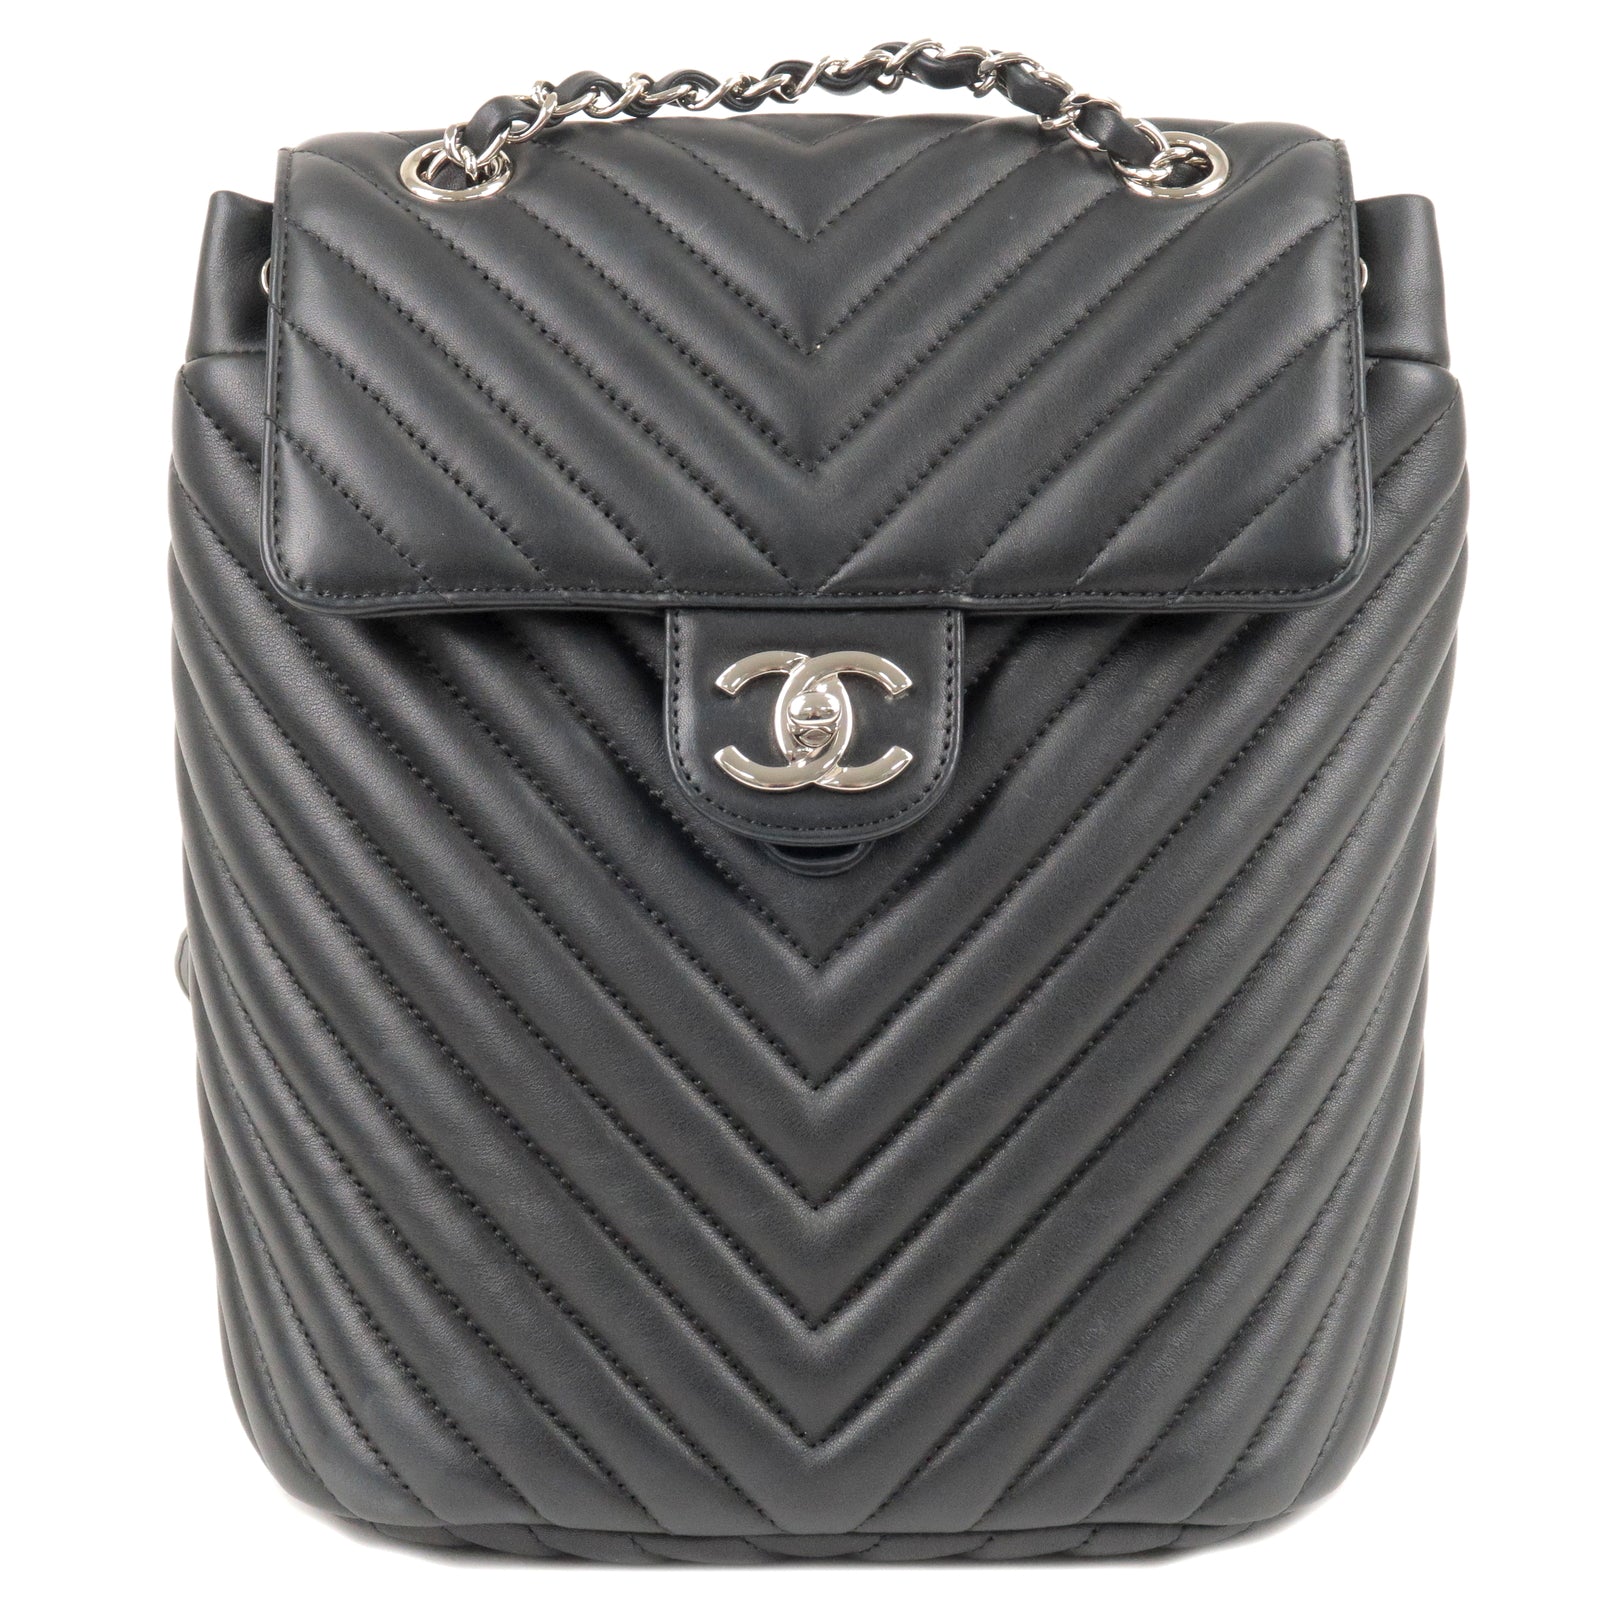 Black - ep_vintage luxury Store - SHW - A91121 – dct - CHANEL main